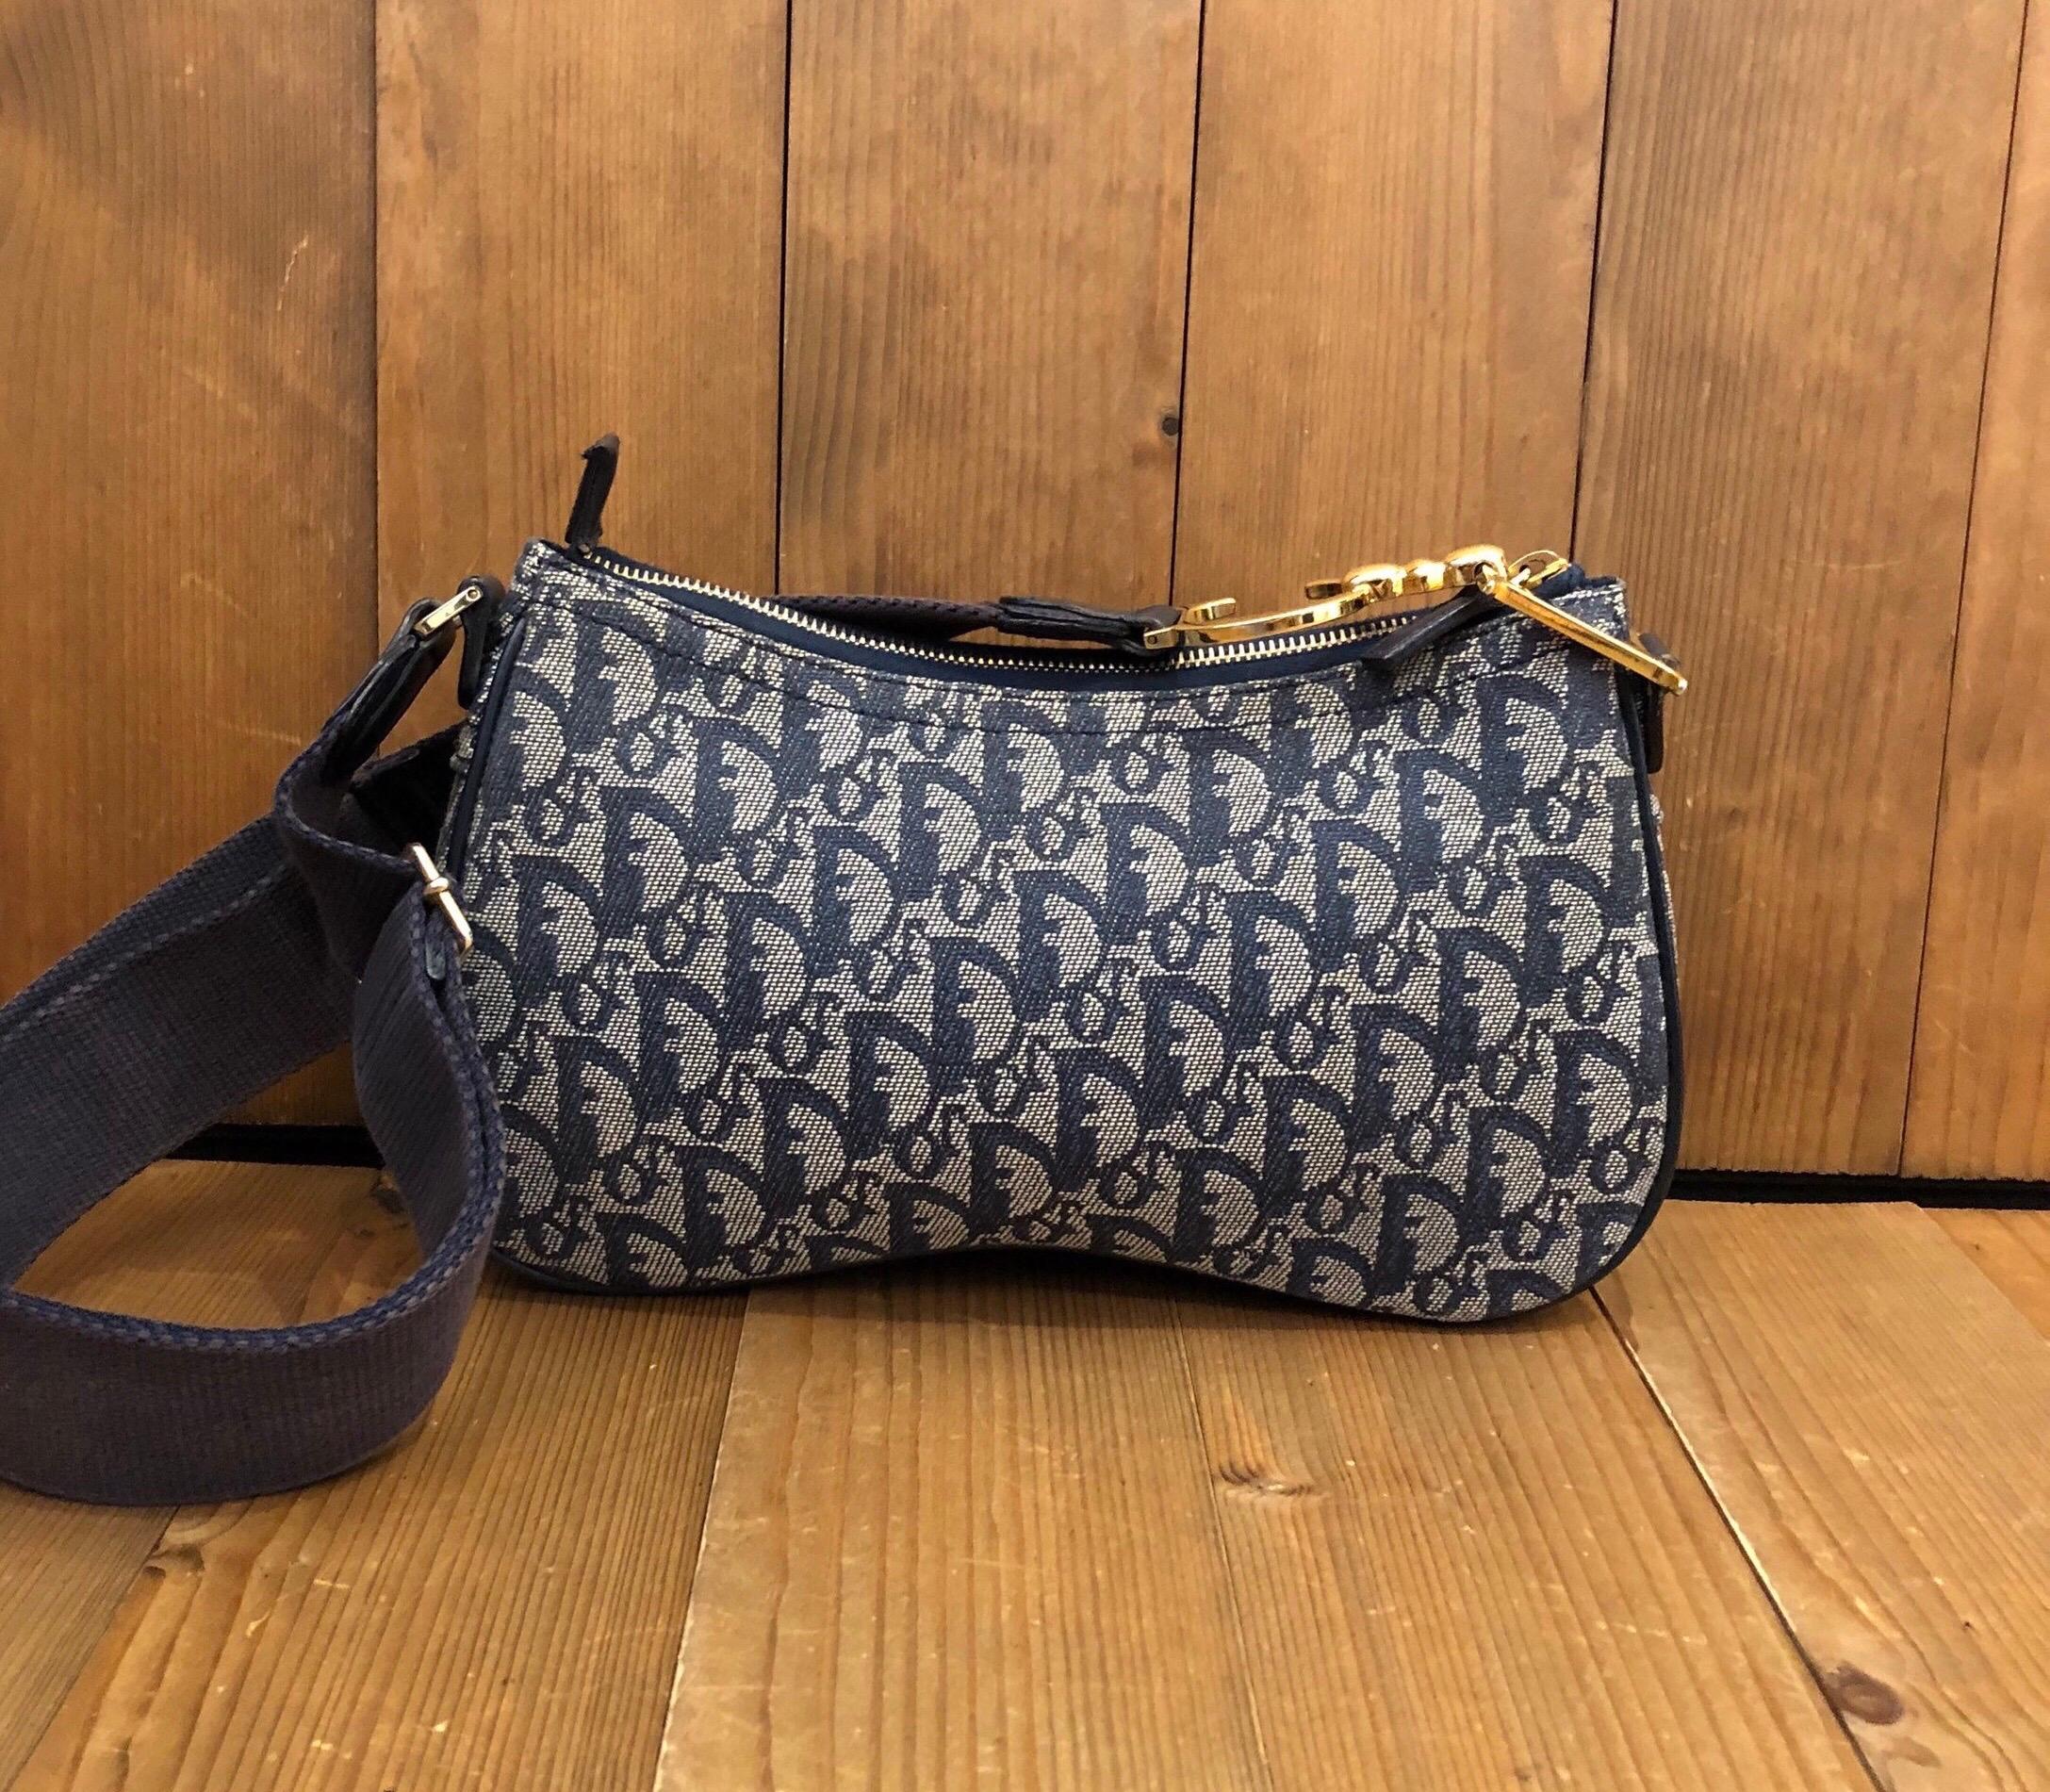 CHRISTIAN DIOR John Galliano Double Saddle Crossbody Bag Unisex
Material: Jacquard/leather 
Color: Navy
Origin: Italy
Measurements: 10.5”x6”x2.25” Strap drop: 14” adjustable to 21”
Specifications: 1 interior zip pocket/1 exterior zip flap pocket